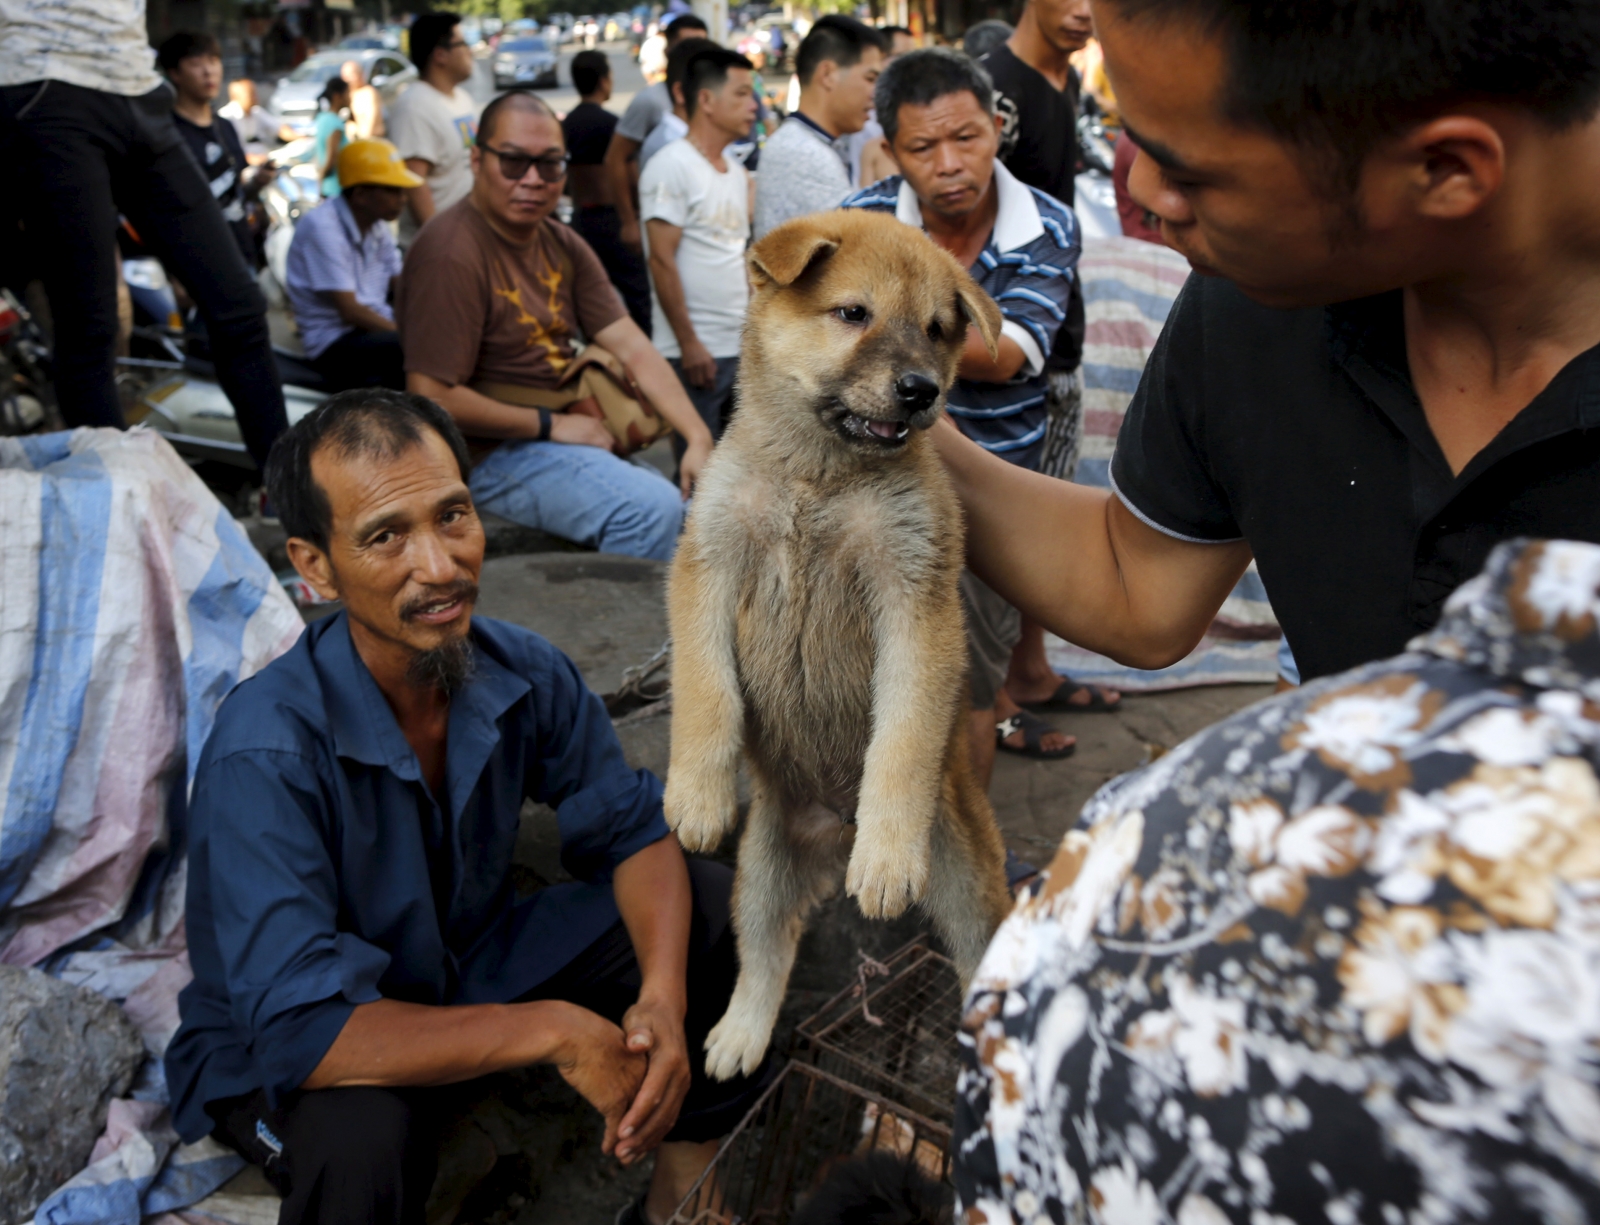 China's Dog Meat Festival 10 things you need to know [Graphic images]